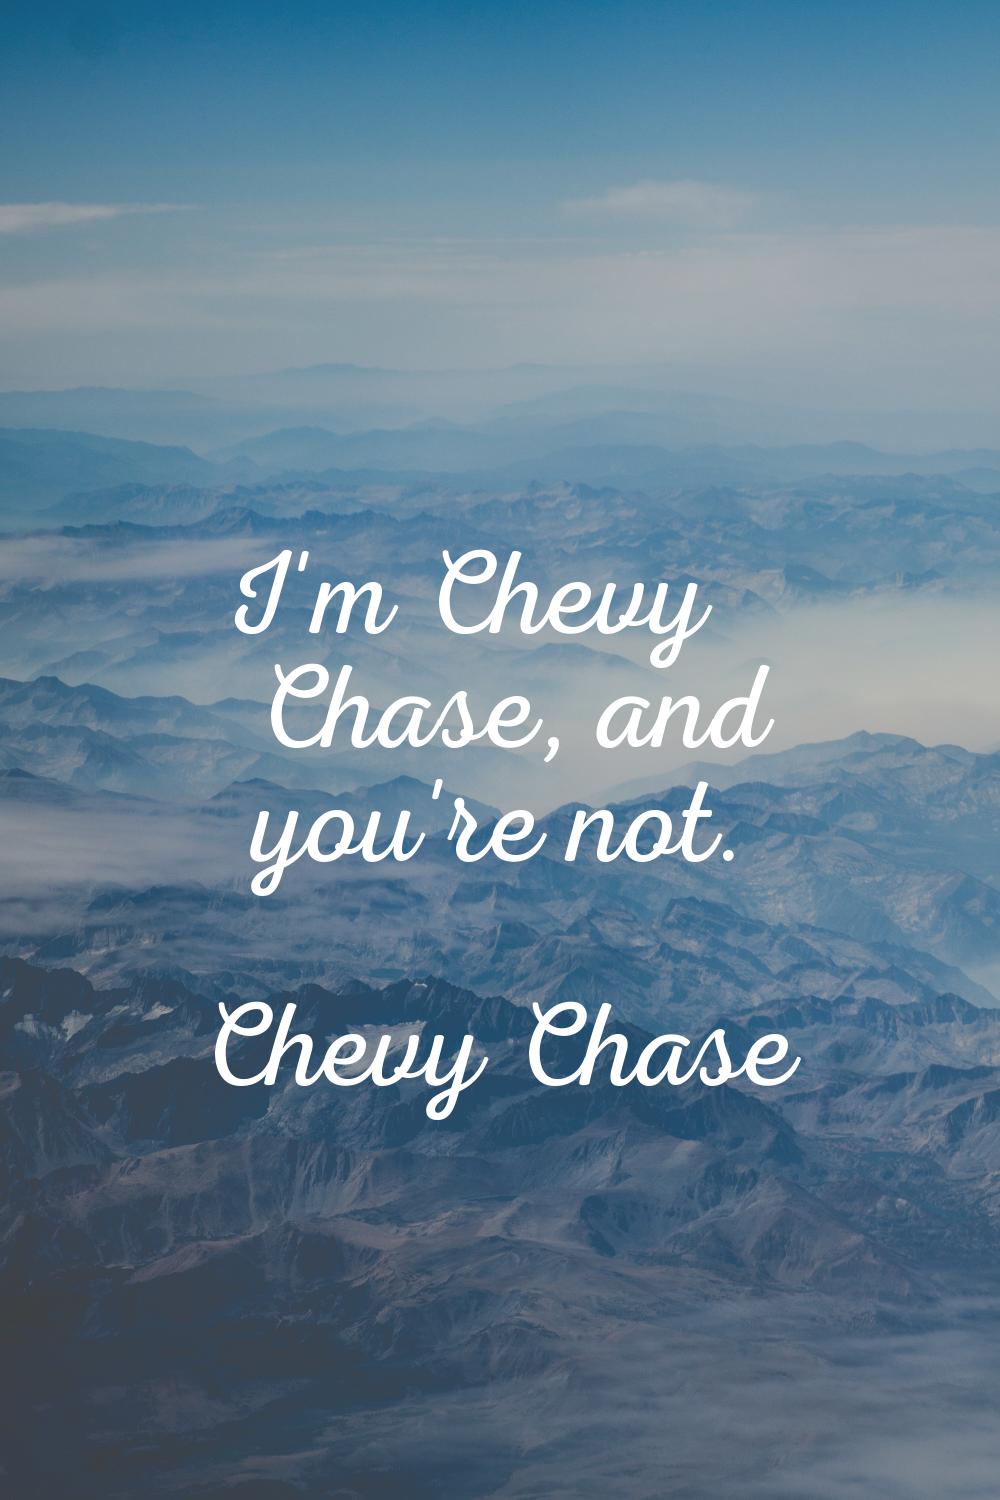 I'm Chevy Chase, and you're not.